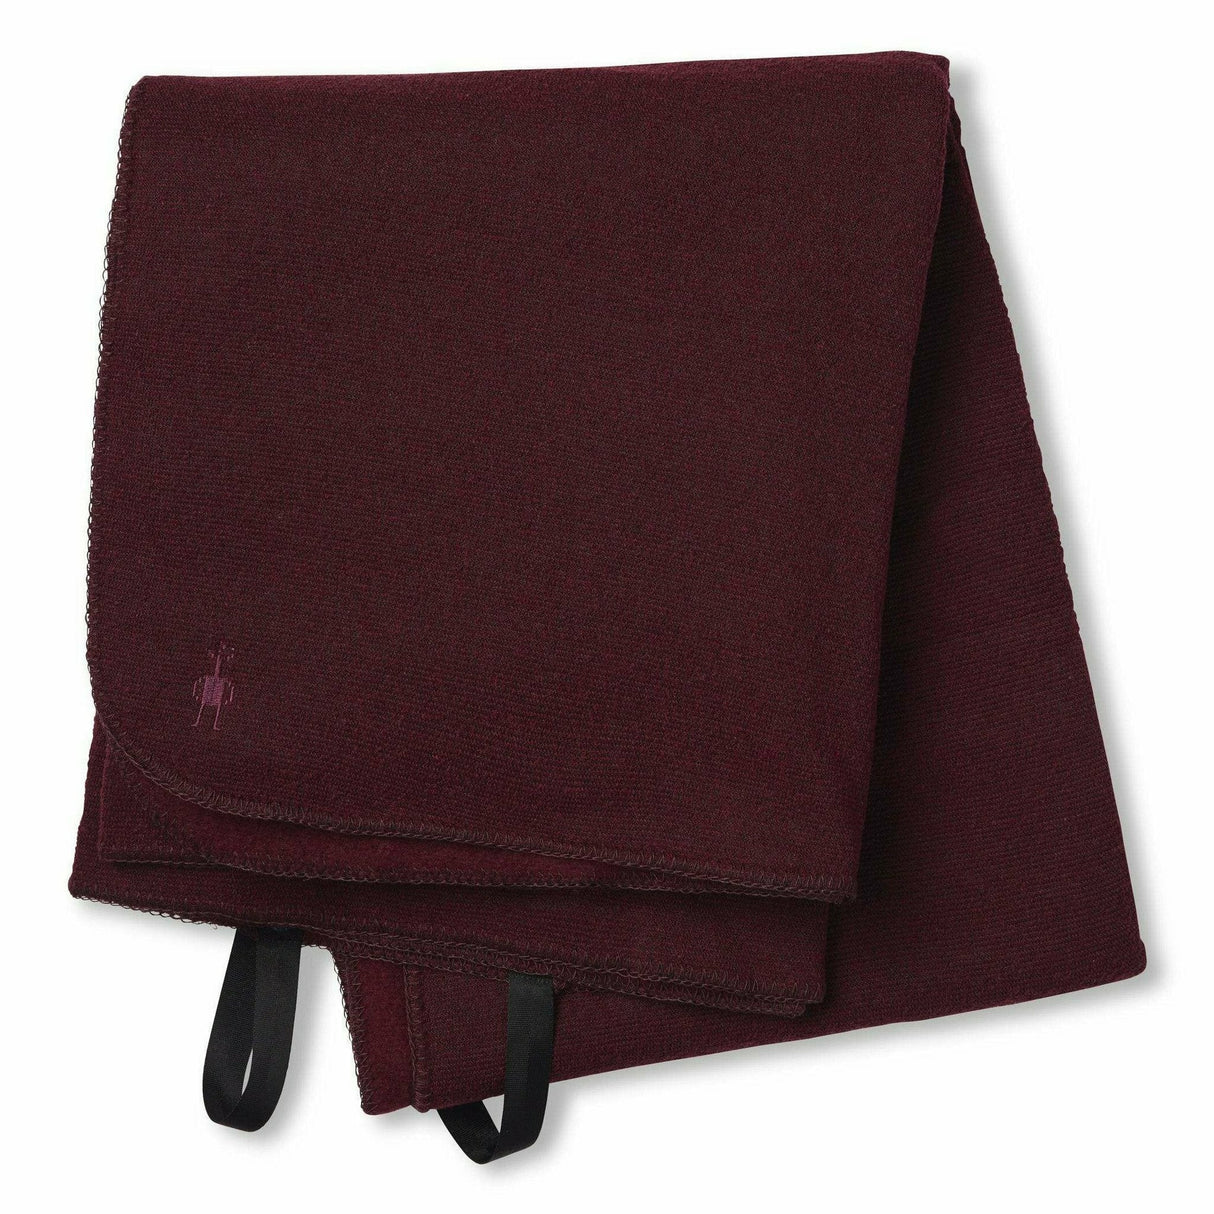 Smartwool Hudson Trail Blanket  -  One Size Fits Most / Ruby